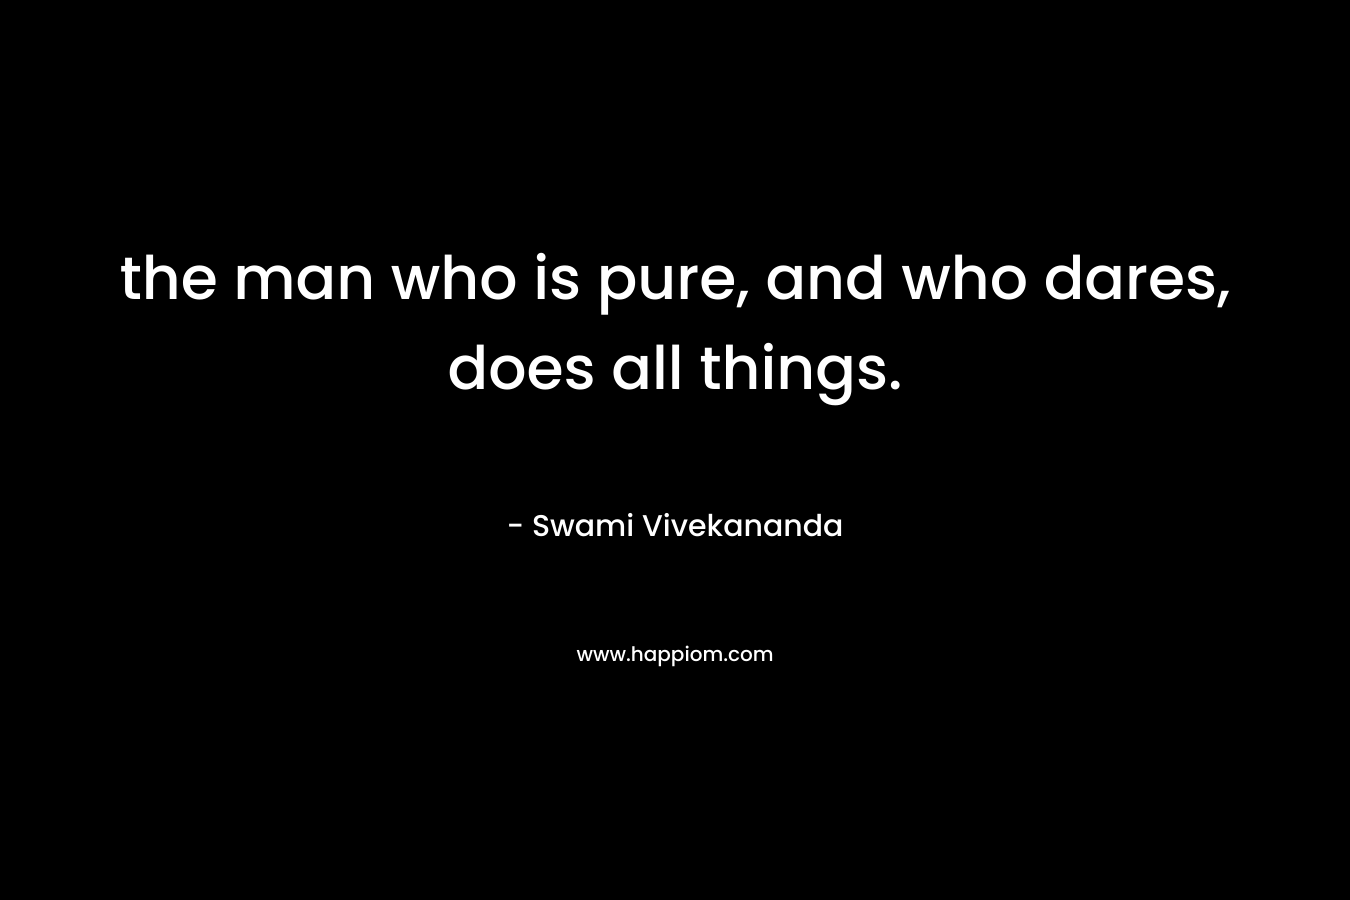 the man who is pure, and who dares, does all things.